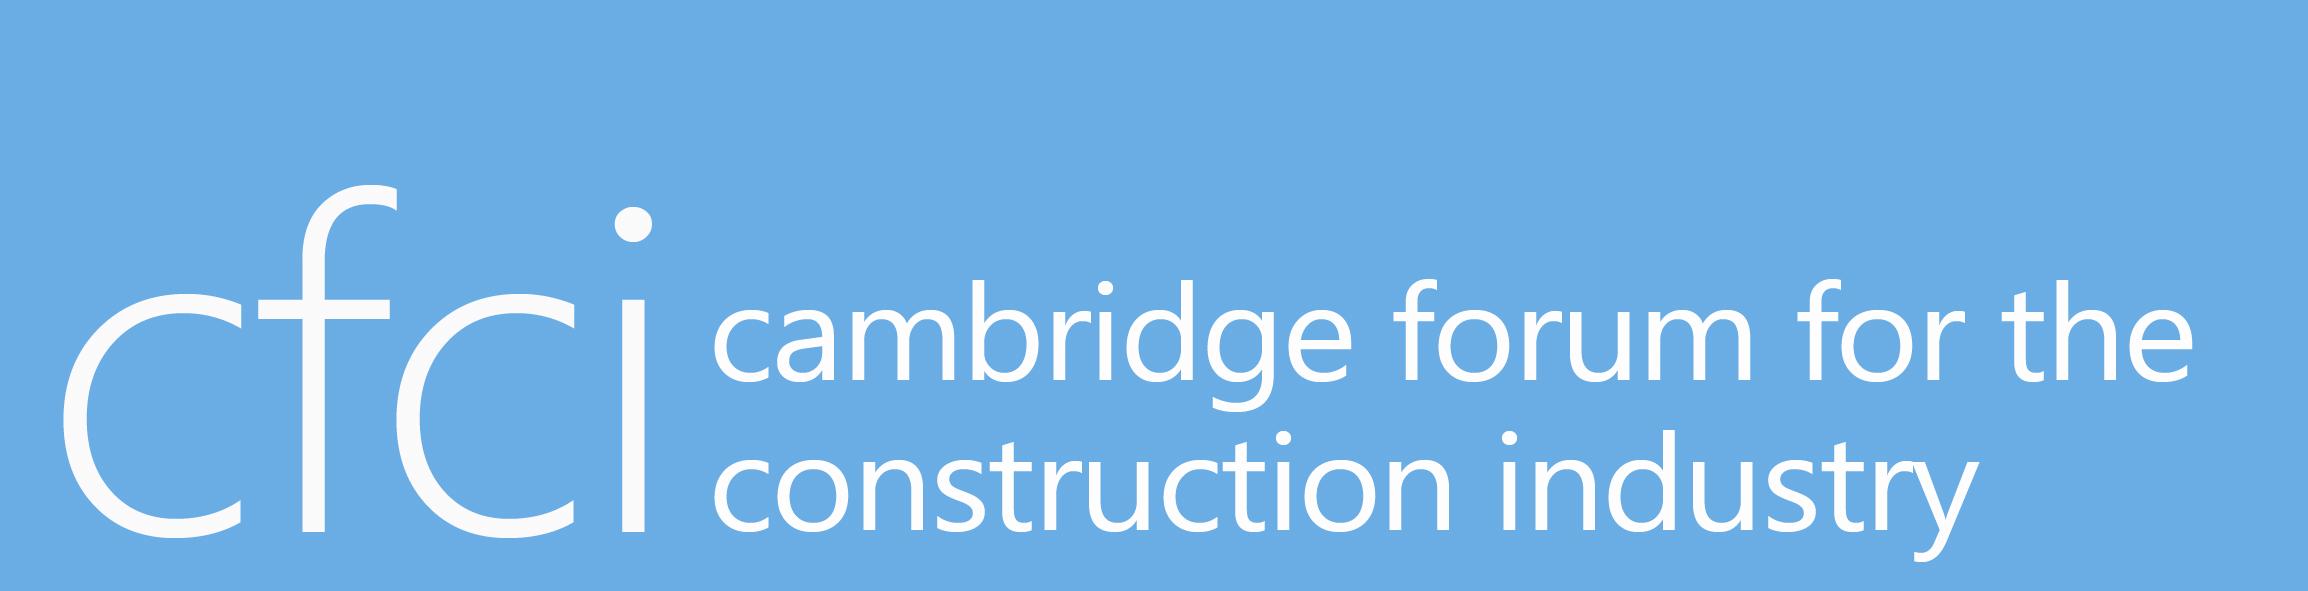 Cambridge forum for the construction industry